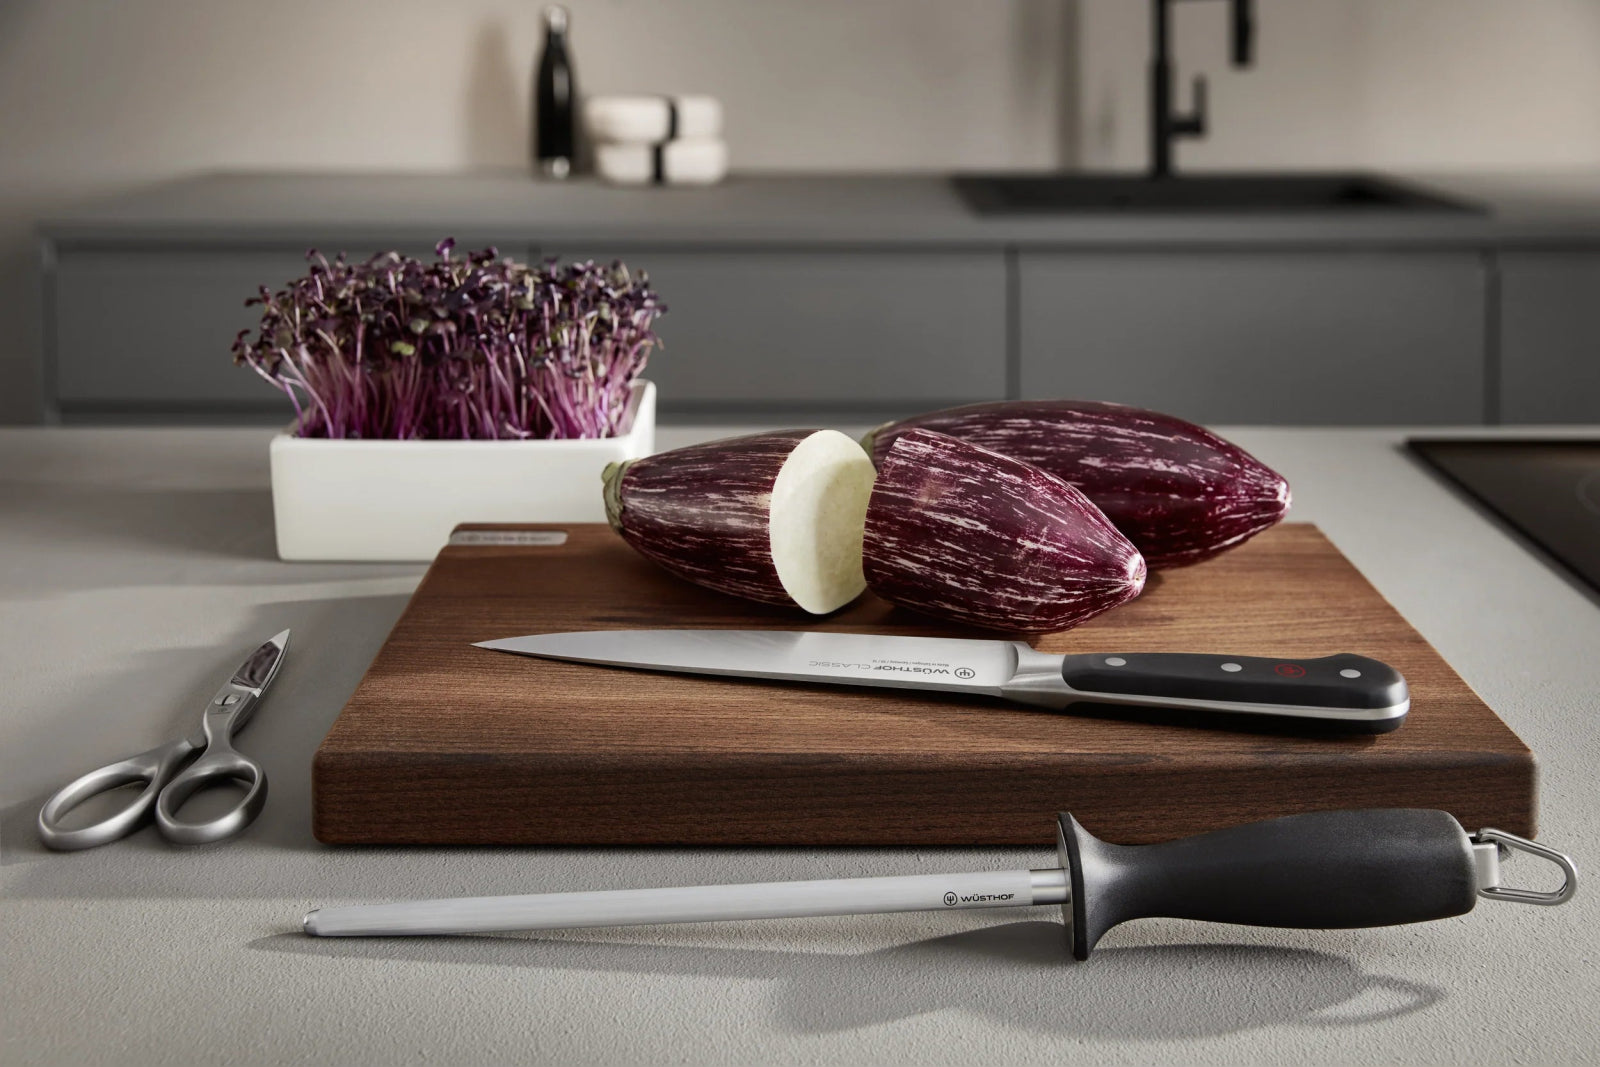 Wusthof Thermo Beech Cutting Board 50cm x 35cm - WT4159800205 - The Cotswold Knife Company